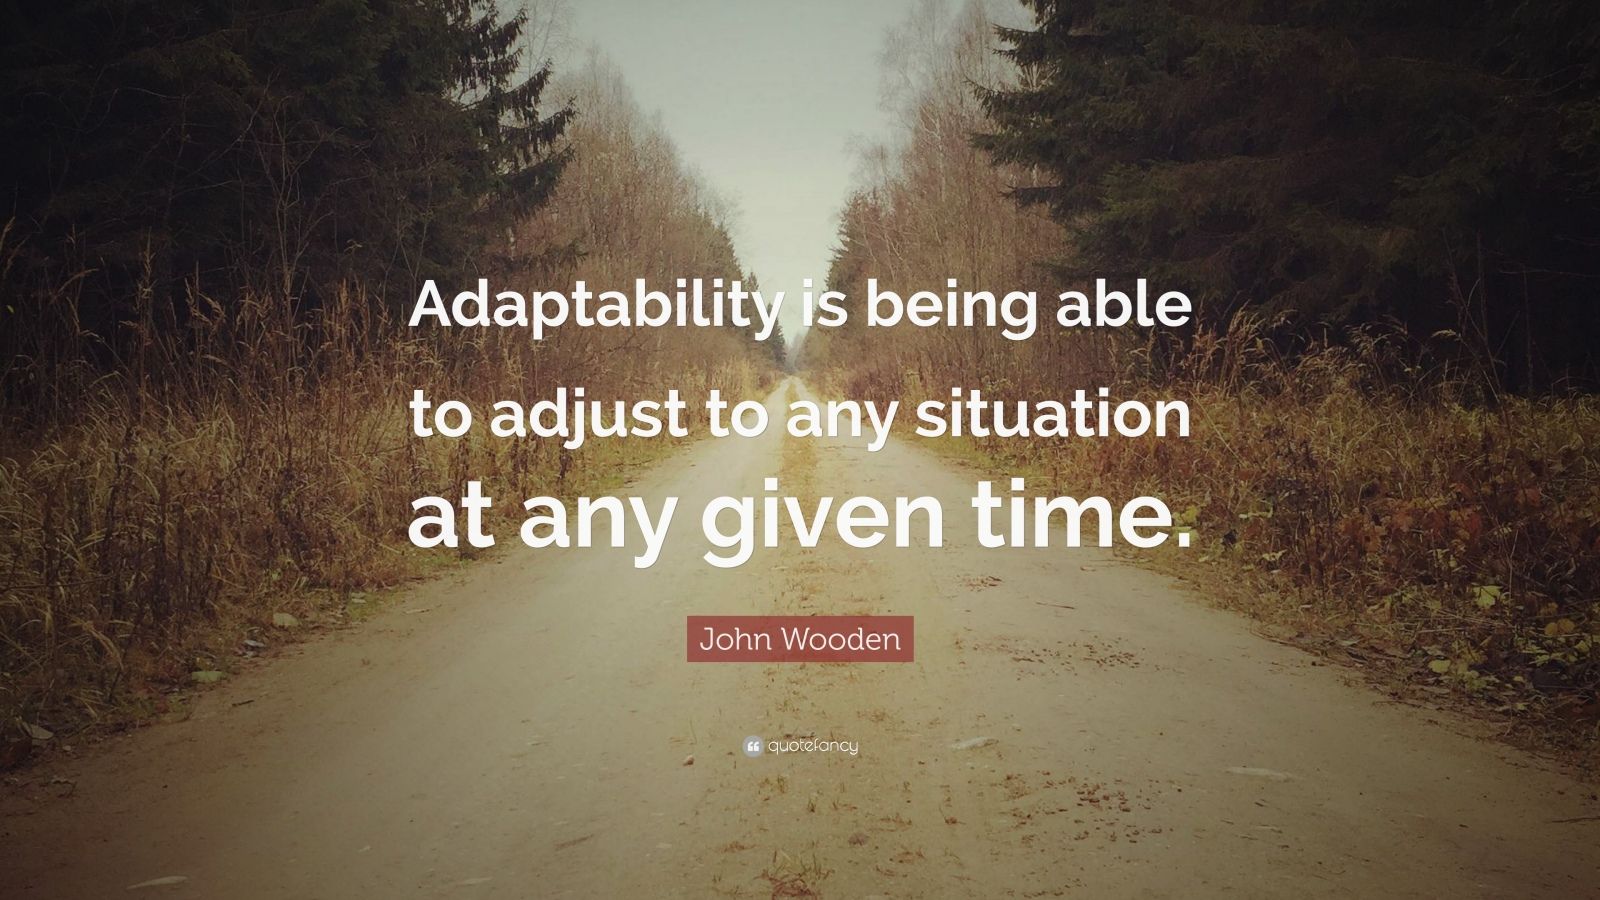 John Wooden Quote: “Adaptability is being able to adjust to any ...